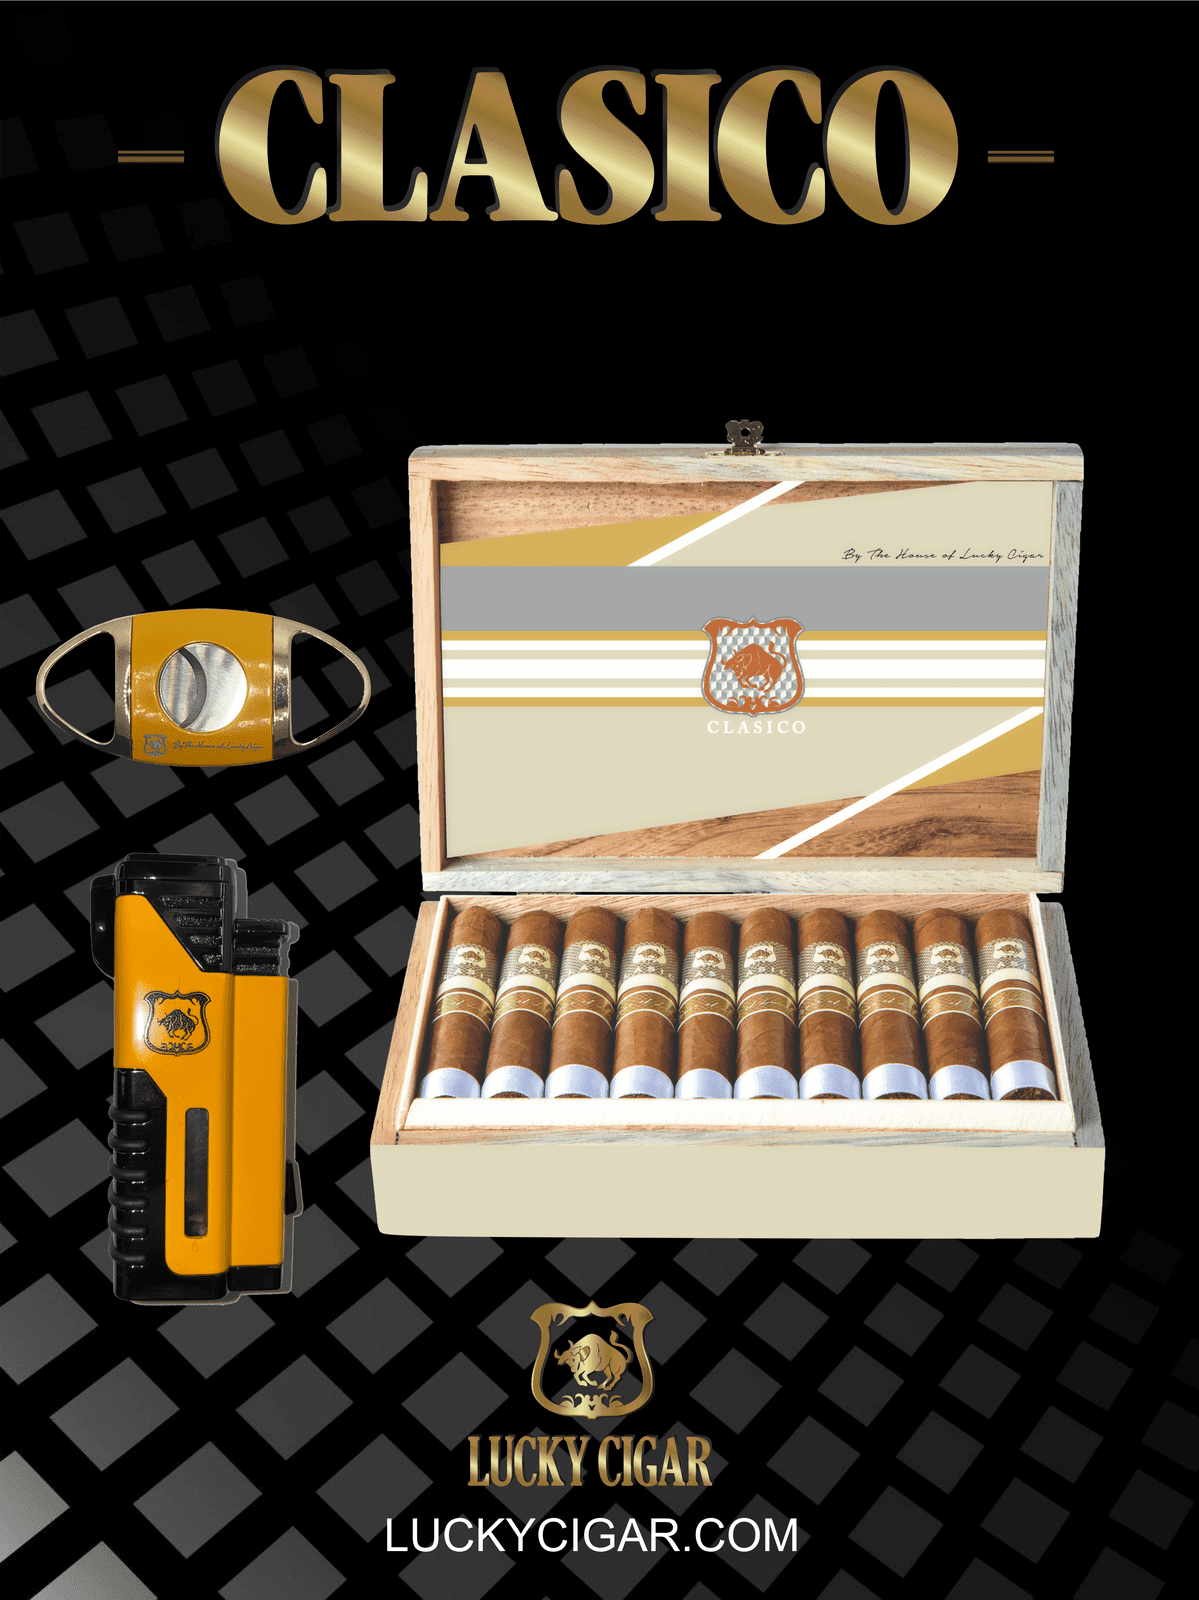 Classic Cigars - Classico by Lucky Cigar: Set of Rotchilde 4 1/2x50 Box of 20 with Torch, Cutter